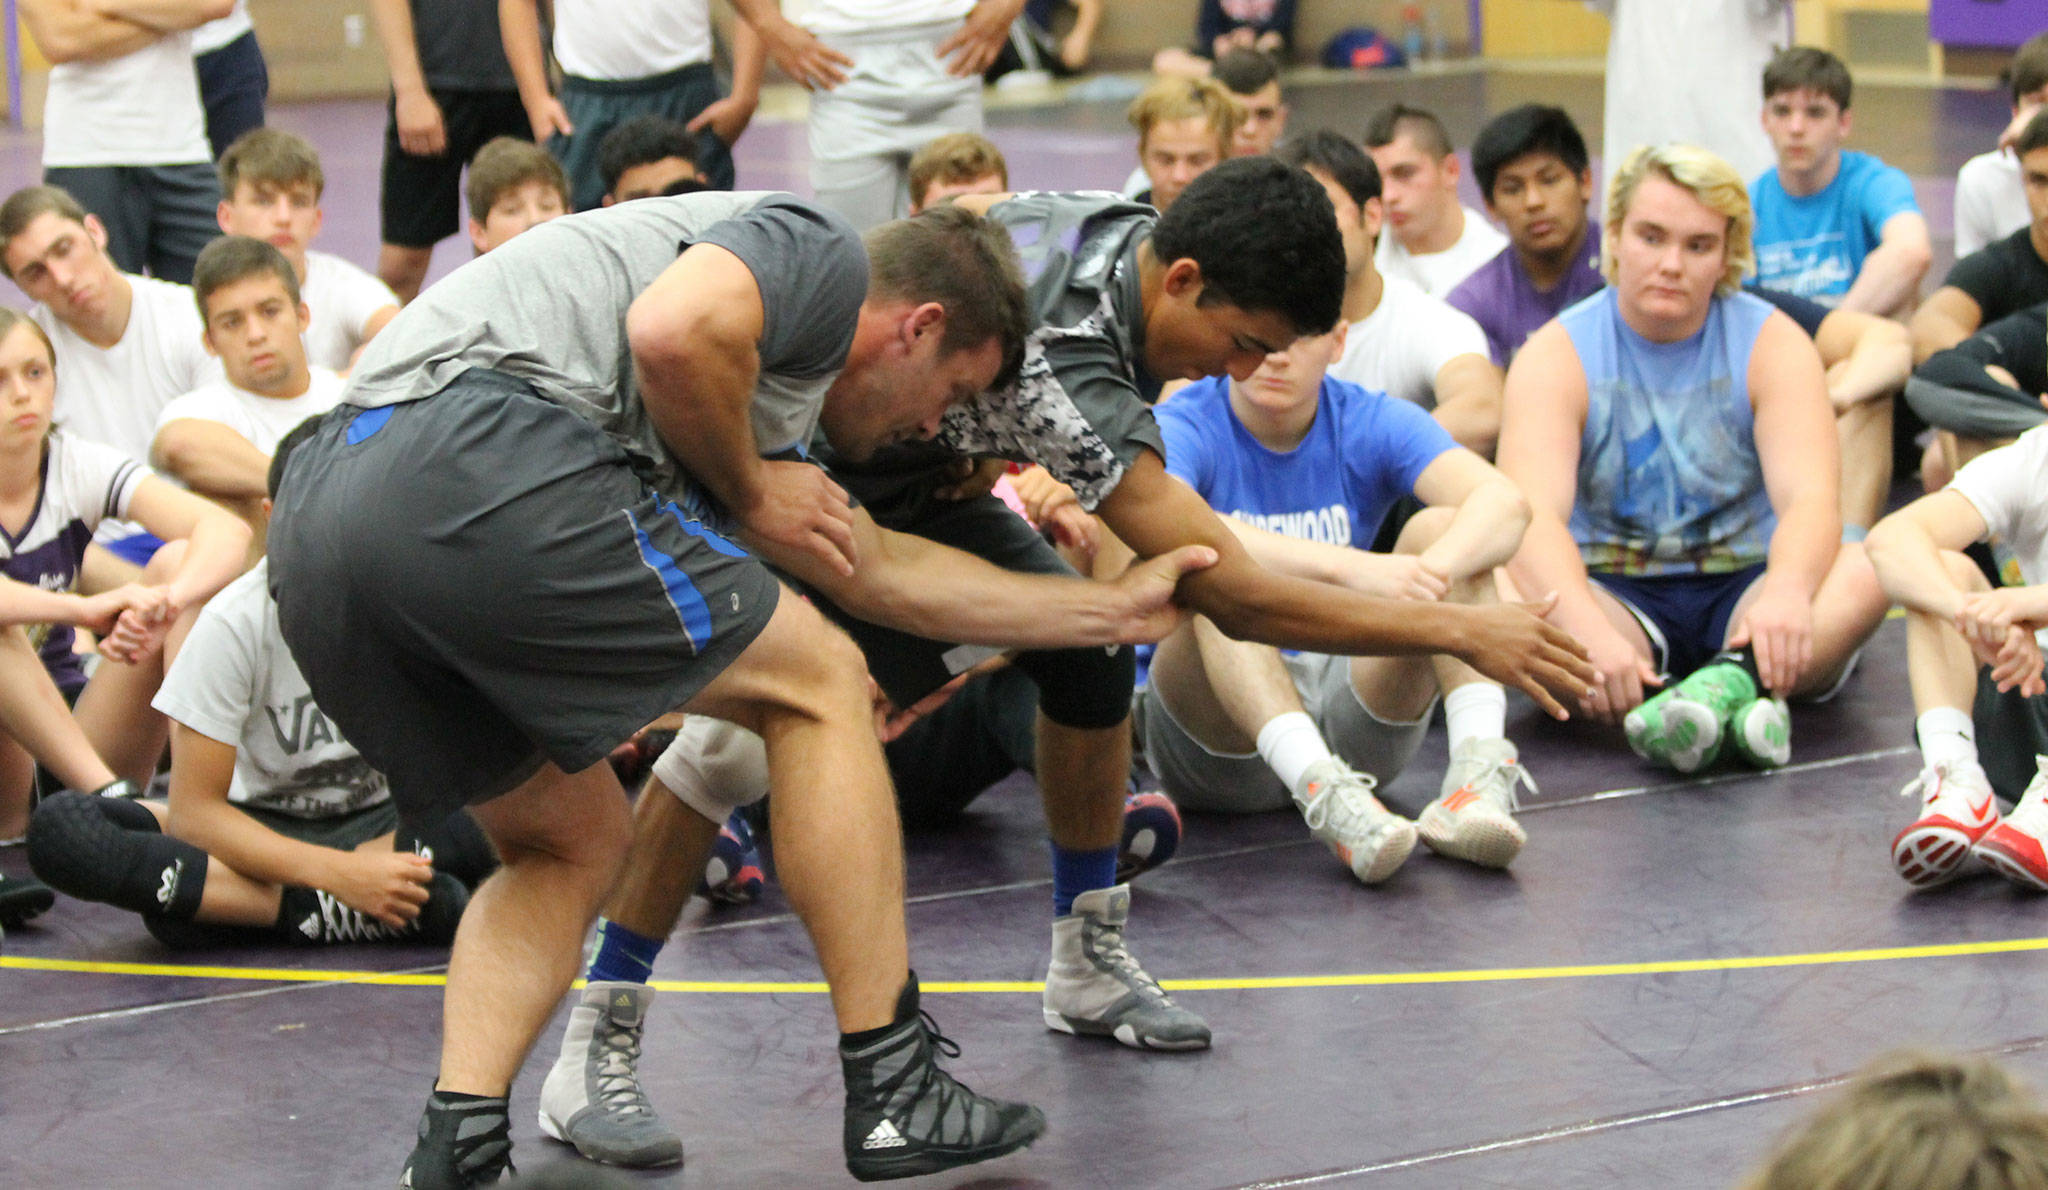 Oak Harbor’s Caleb Fitzgerald, right, helps counselor Jon Trenge display a move as the other campers look on. (Photo by Jim Waller/Whidbey News-Times)